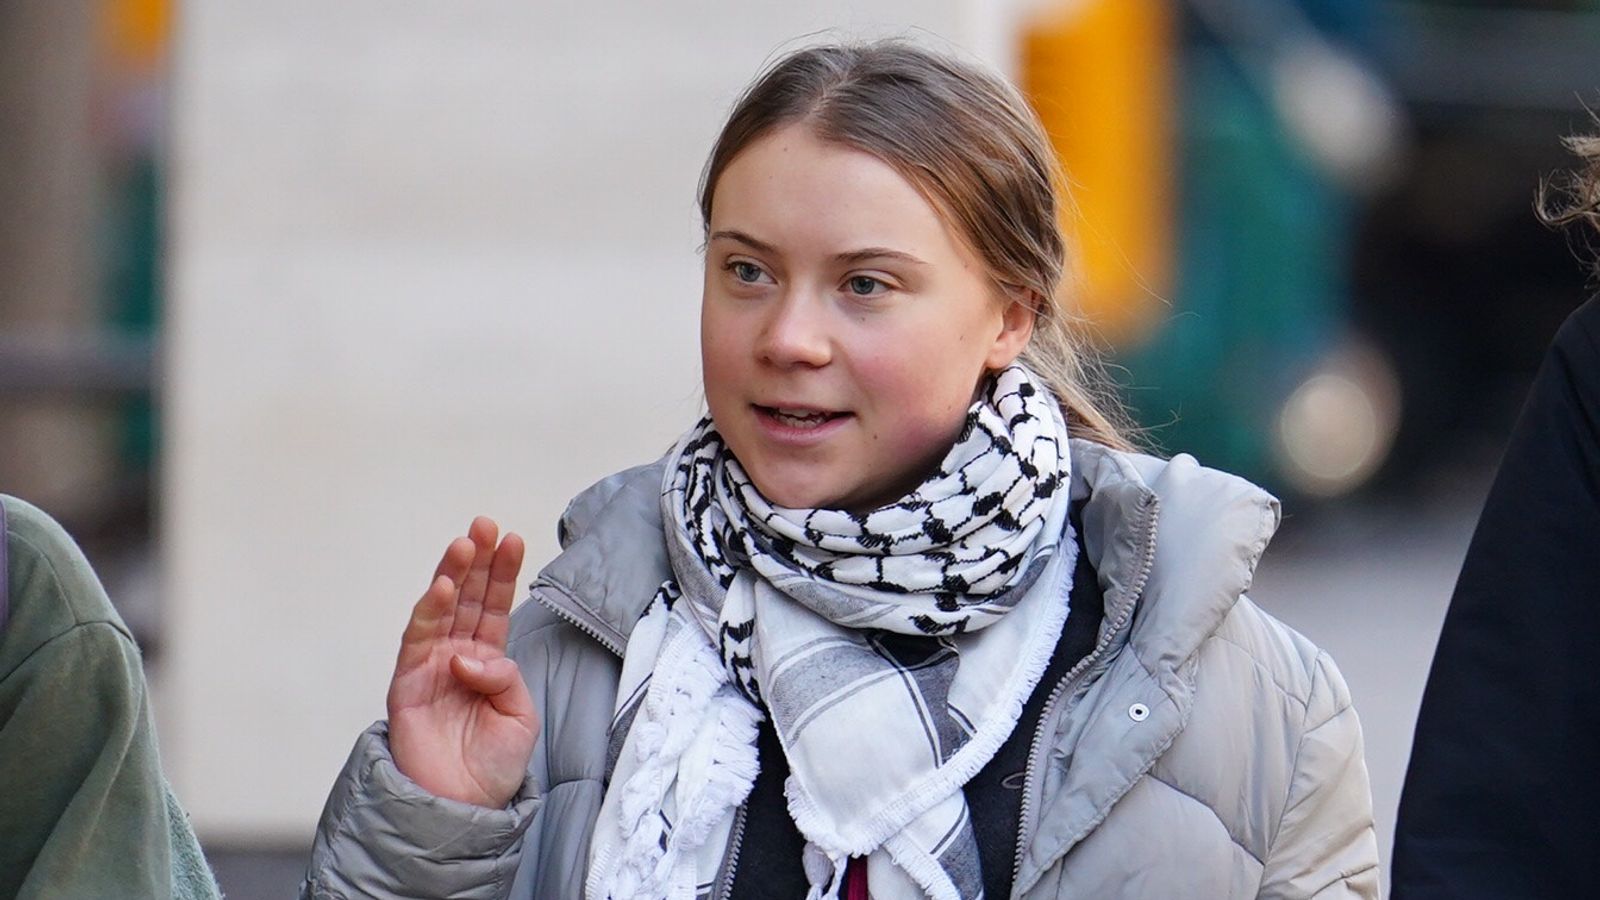 Greta Thunberg: Activist got 'final warning' to move before arrest at London protest, trial hears